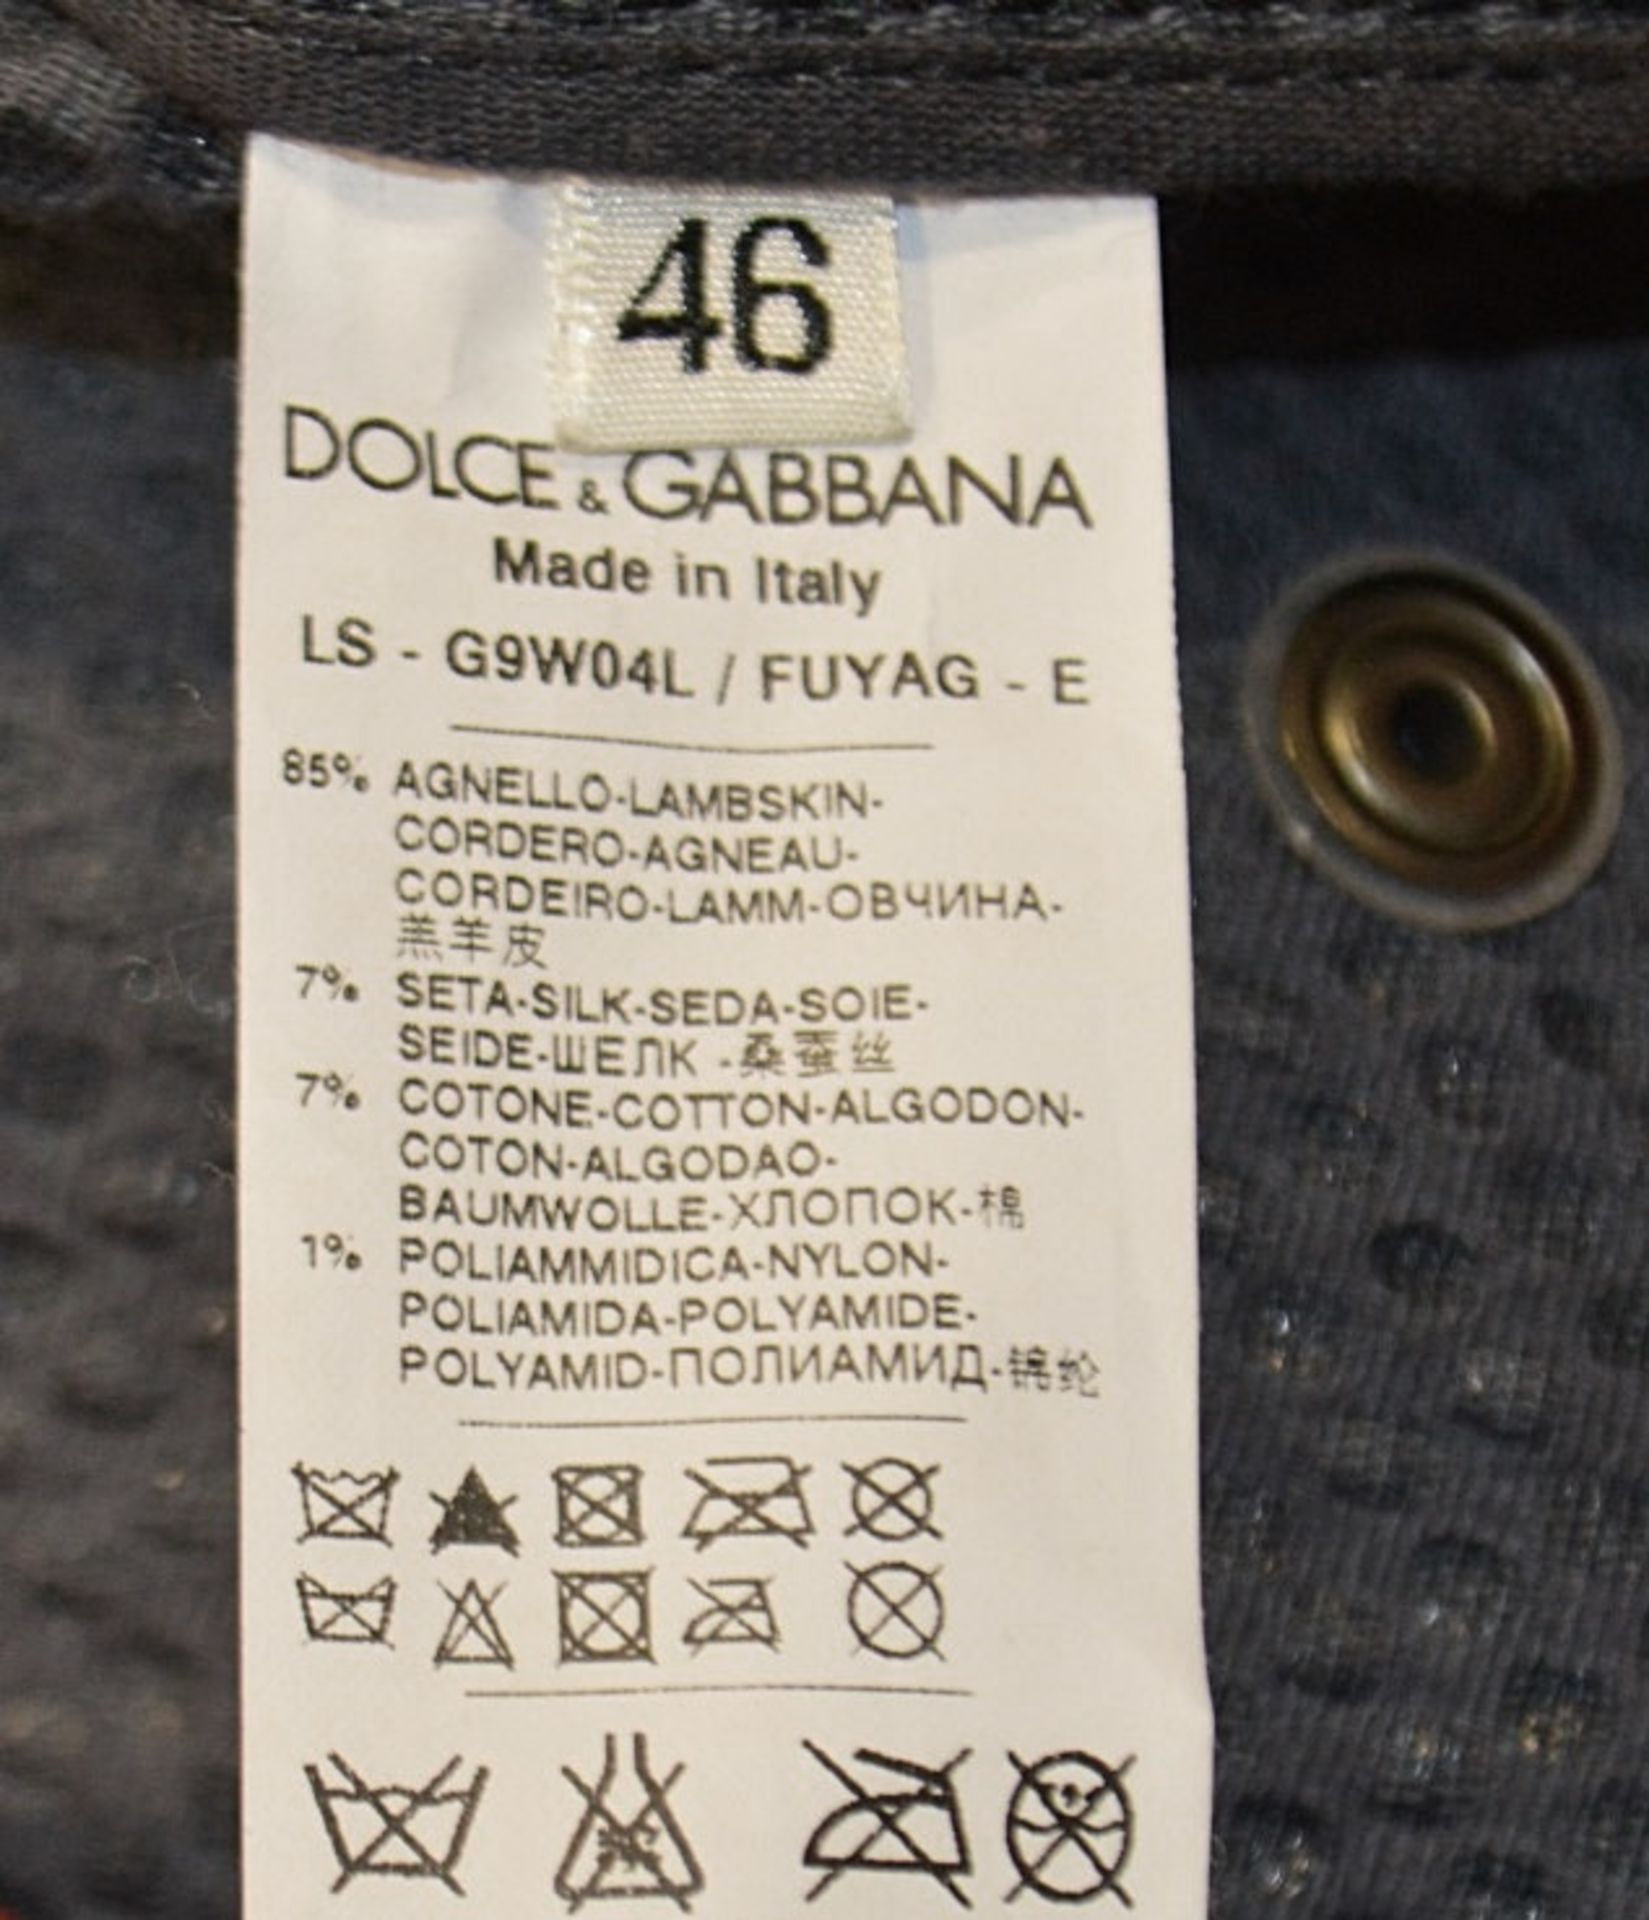 1 x Men's Genuine Dolce & Gabbana Bomber Jacket In Navy - Size: 46 - Preowned In Very Good Condition - Image 9 of 9